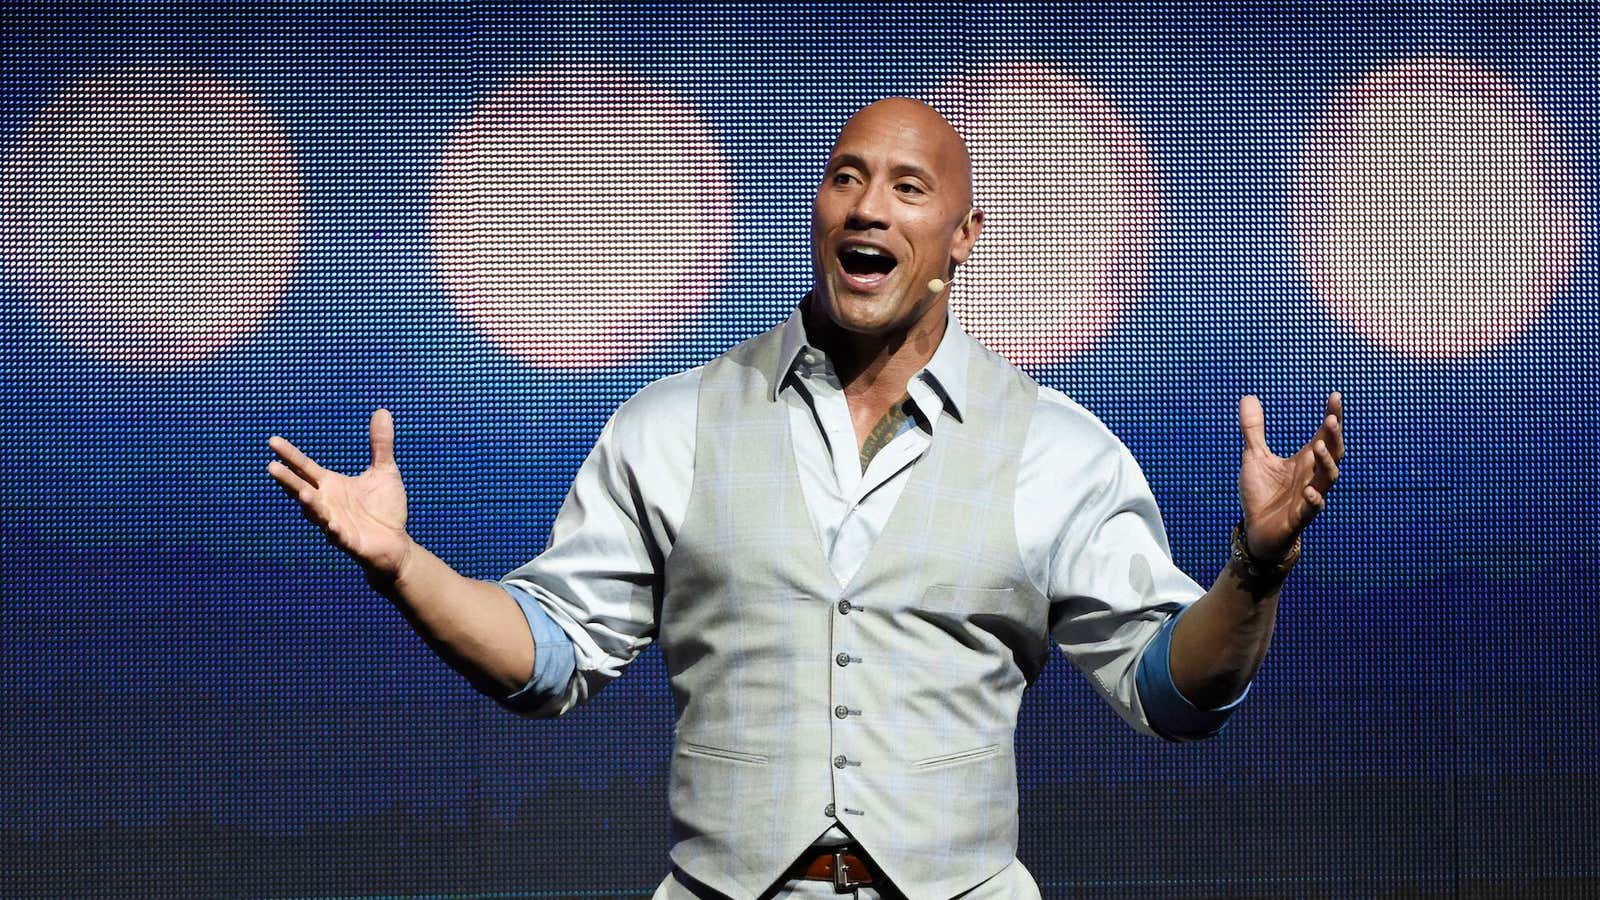 The Rock’s upcoming movie is going straight to Netflix.